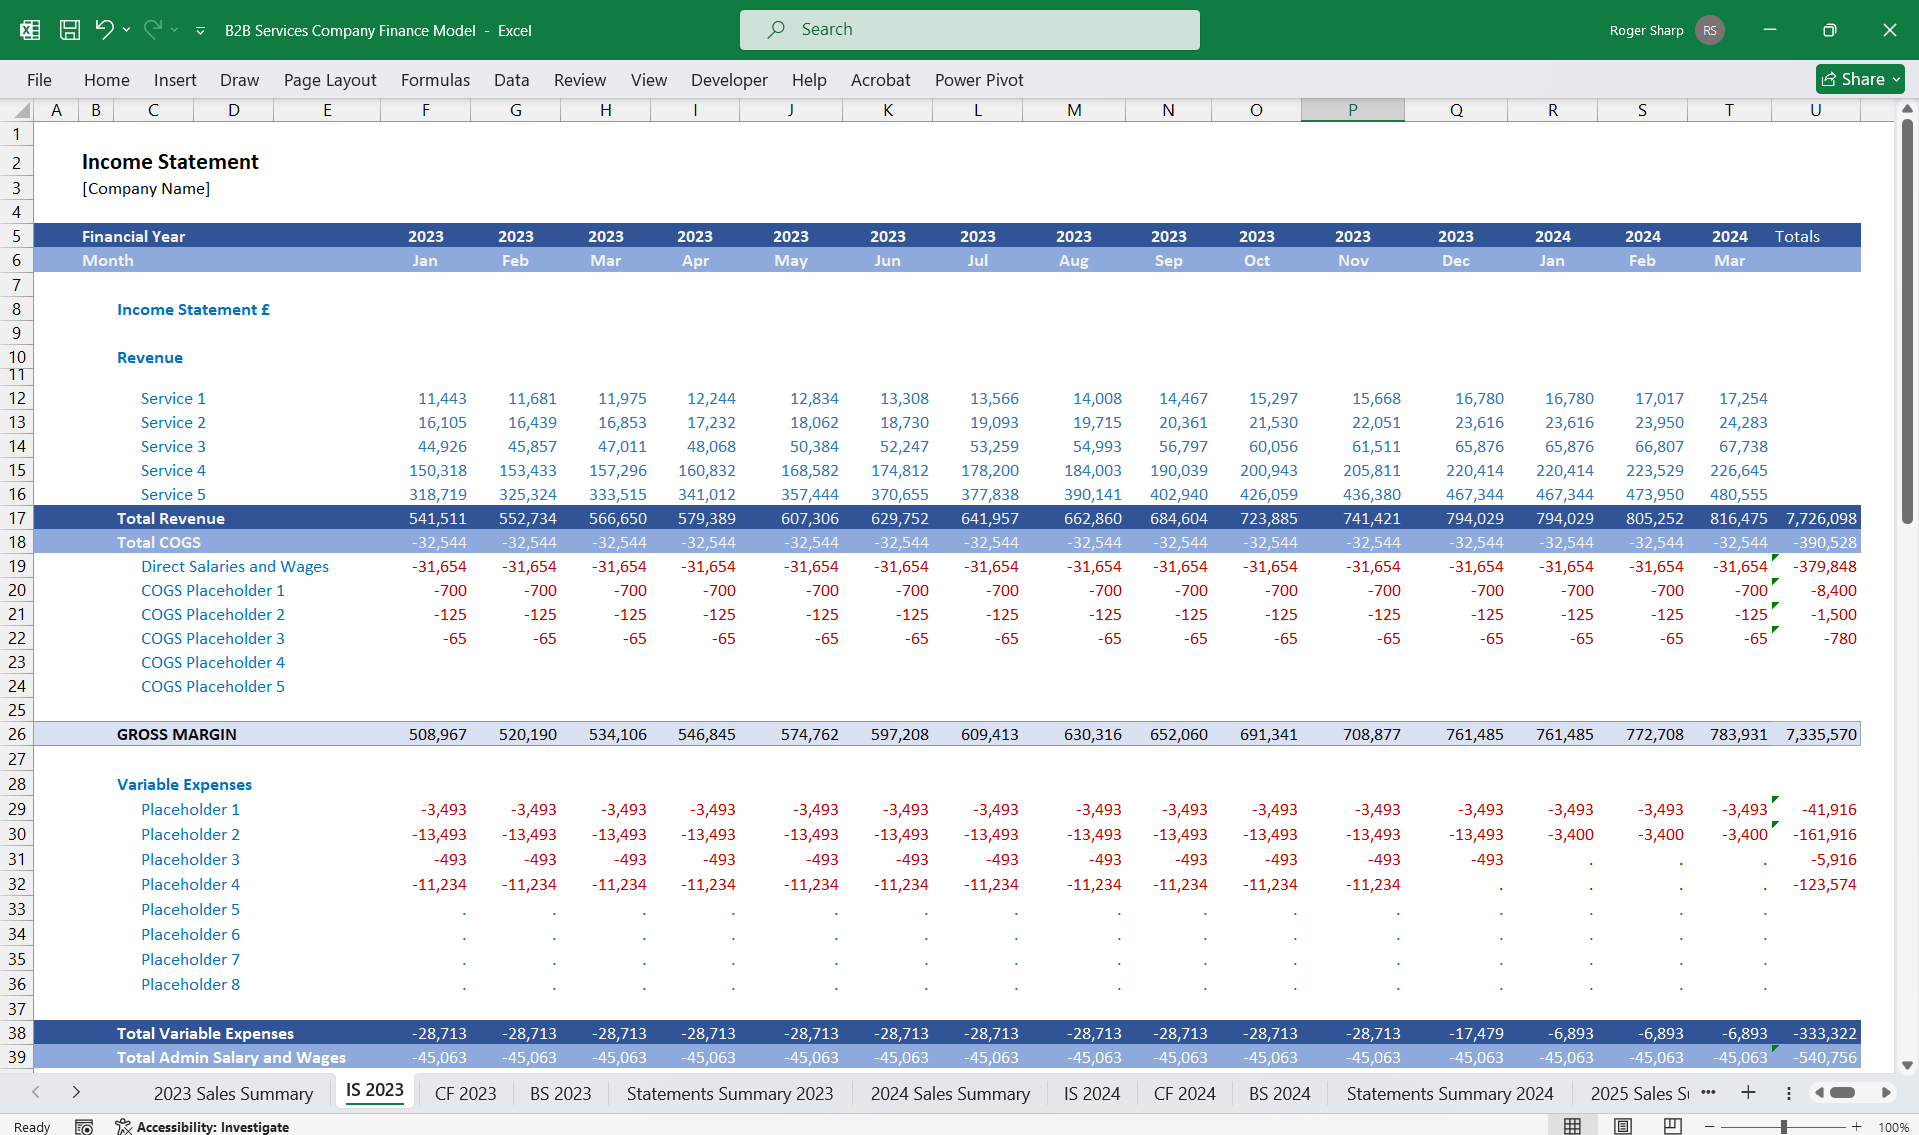 B2B Services Company Finance Model 5 Year 3 Statement (Excel template (XLSX)) Preview Image